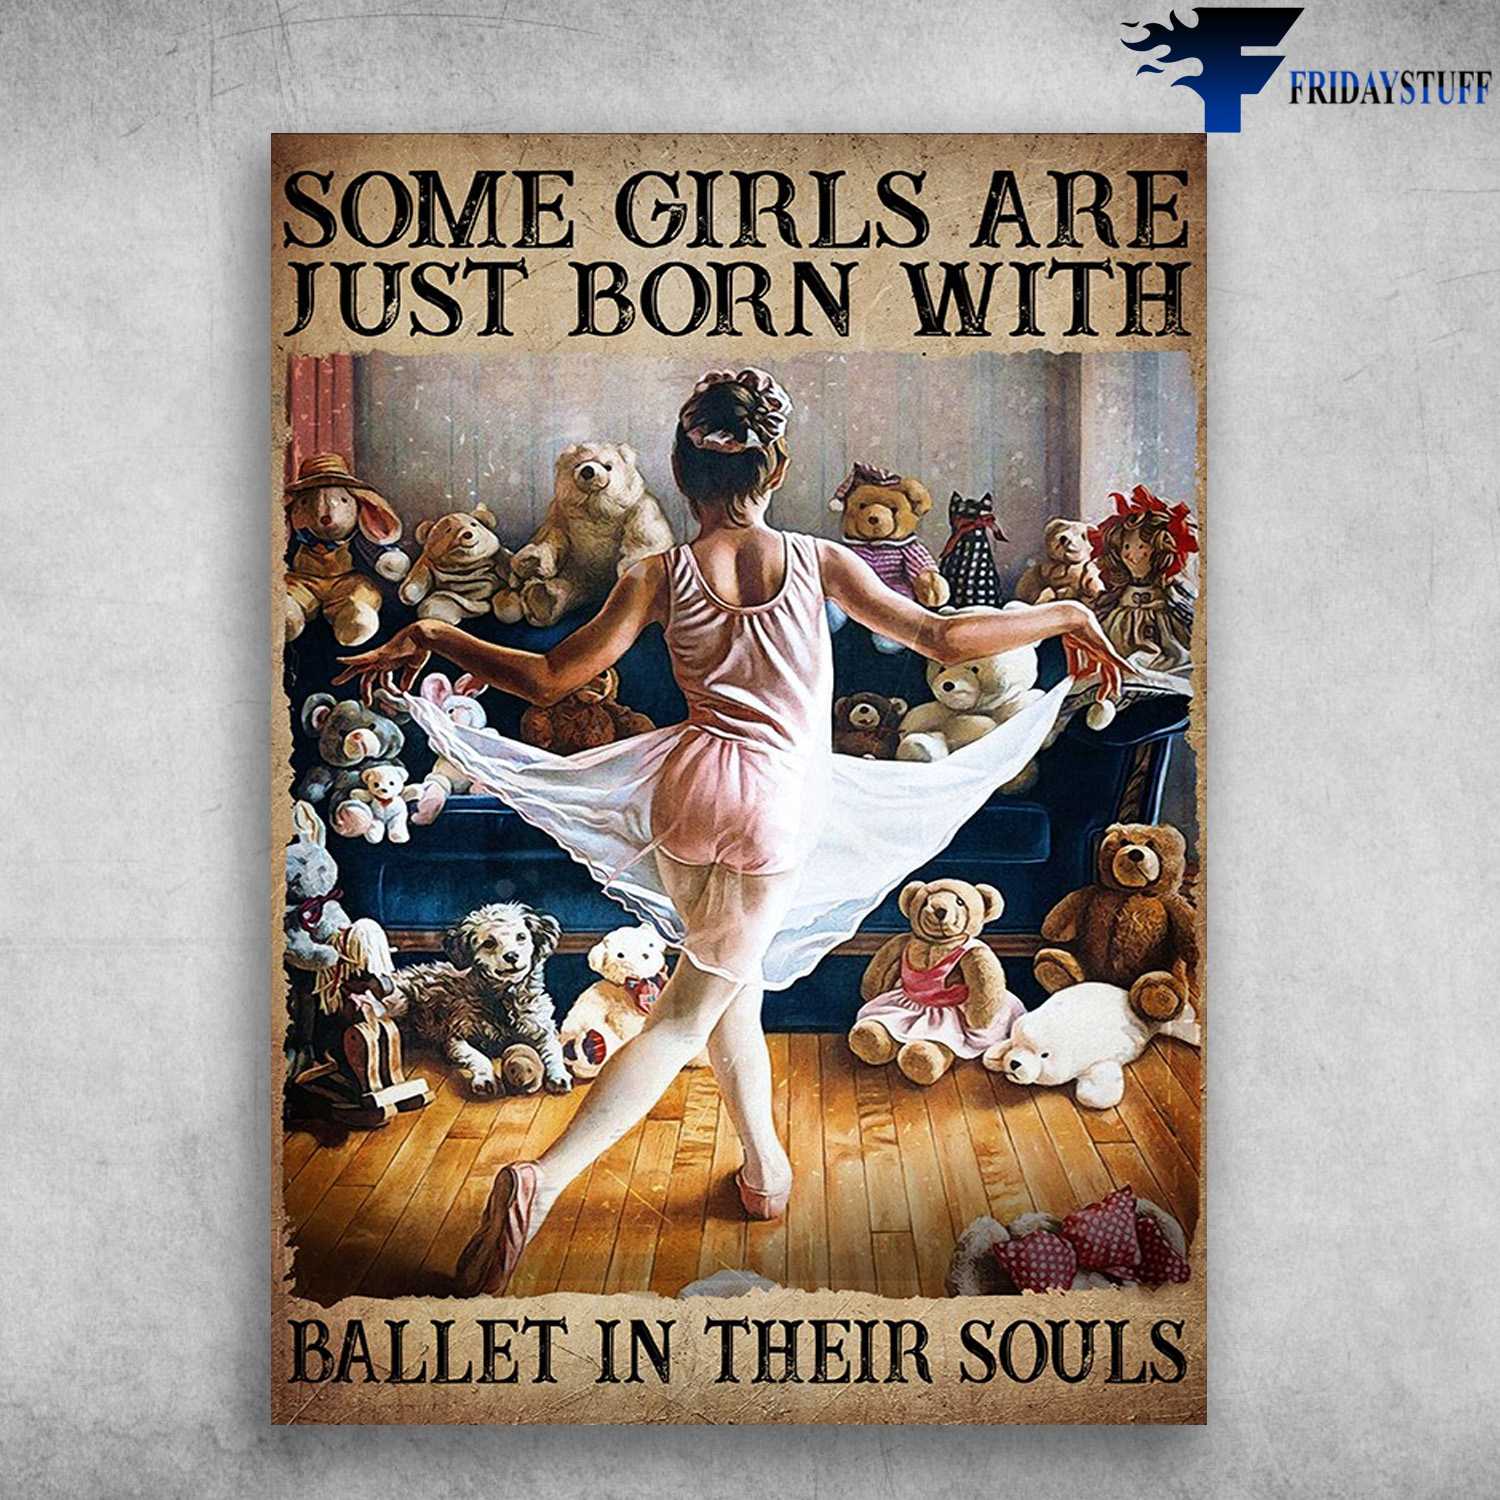 Little Girl Ballet, Ballet Dancer - Some Girl Are Just Born With, Ballet In Their Souls